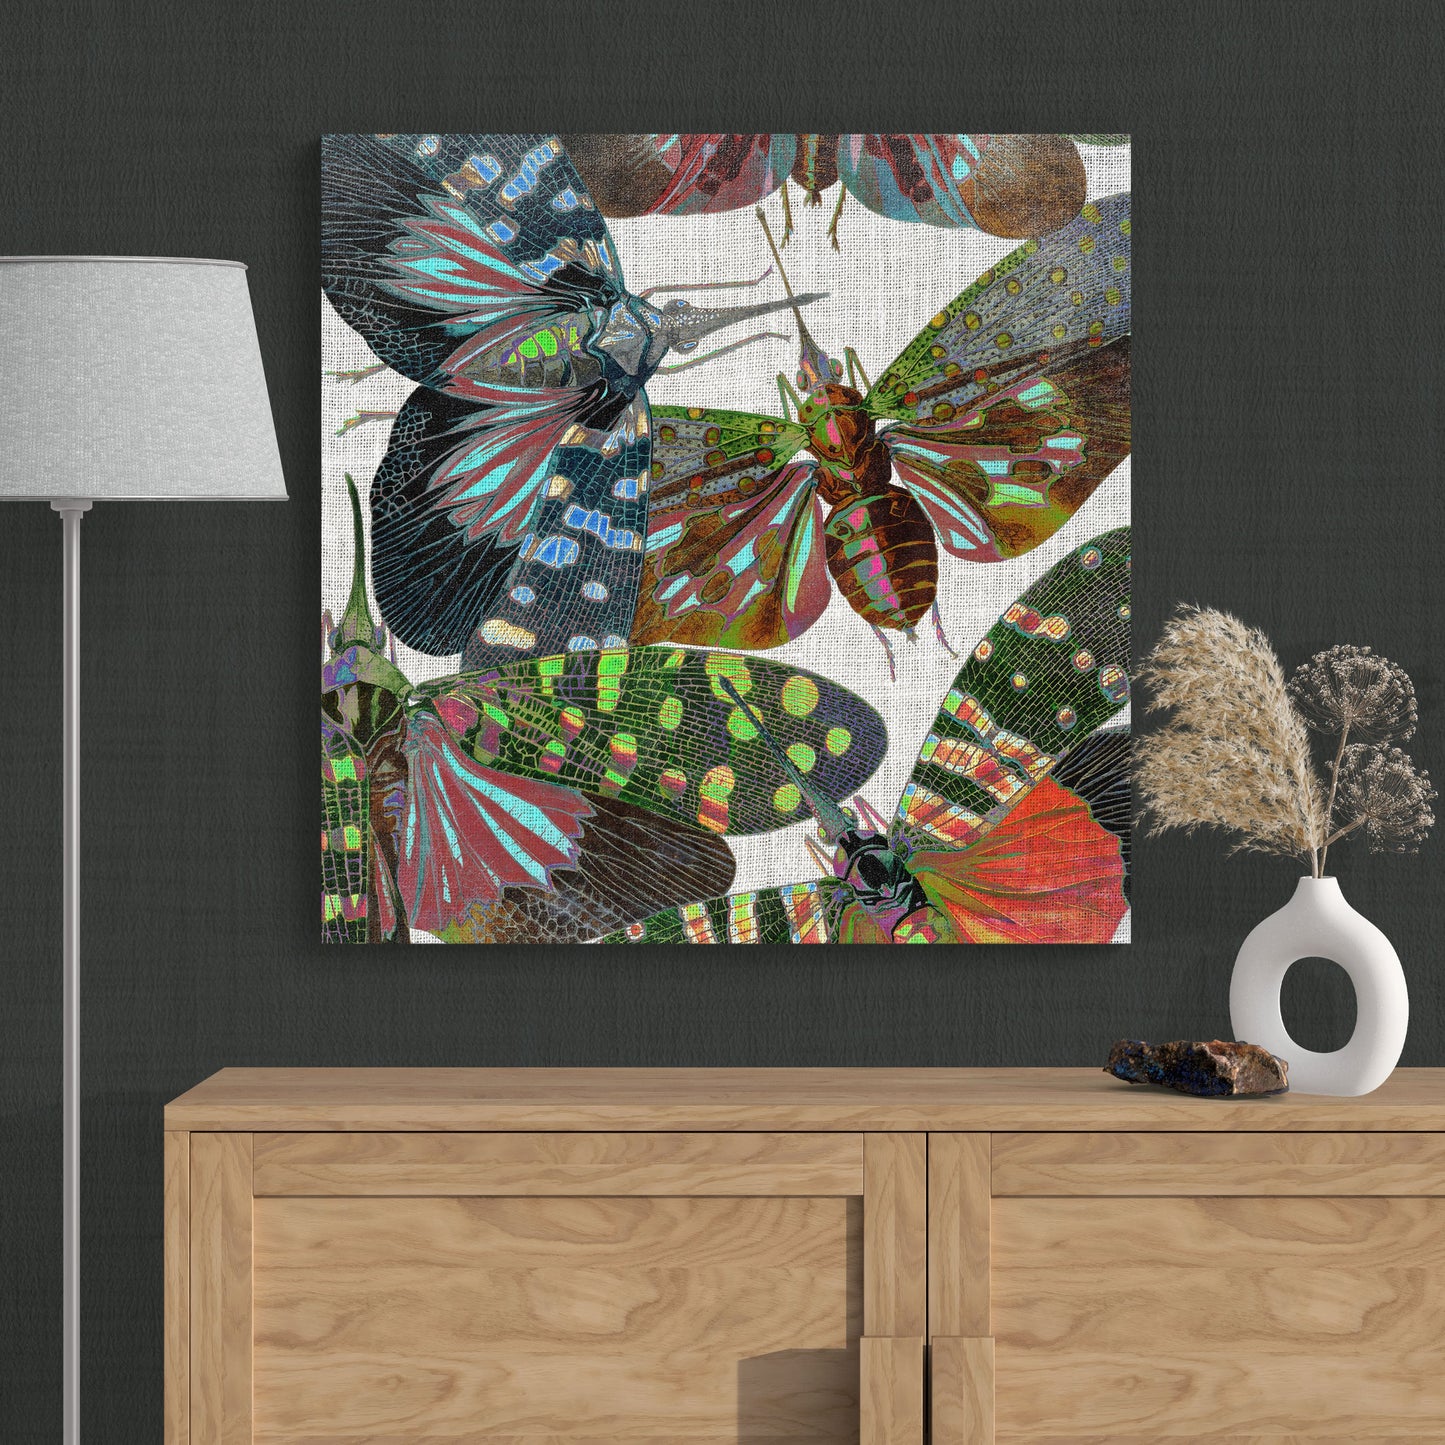 Abstract Insects Lanternfly Collage - Colorful Nature Canvas Wall Art - Retro Reverence